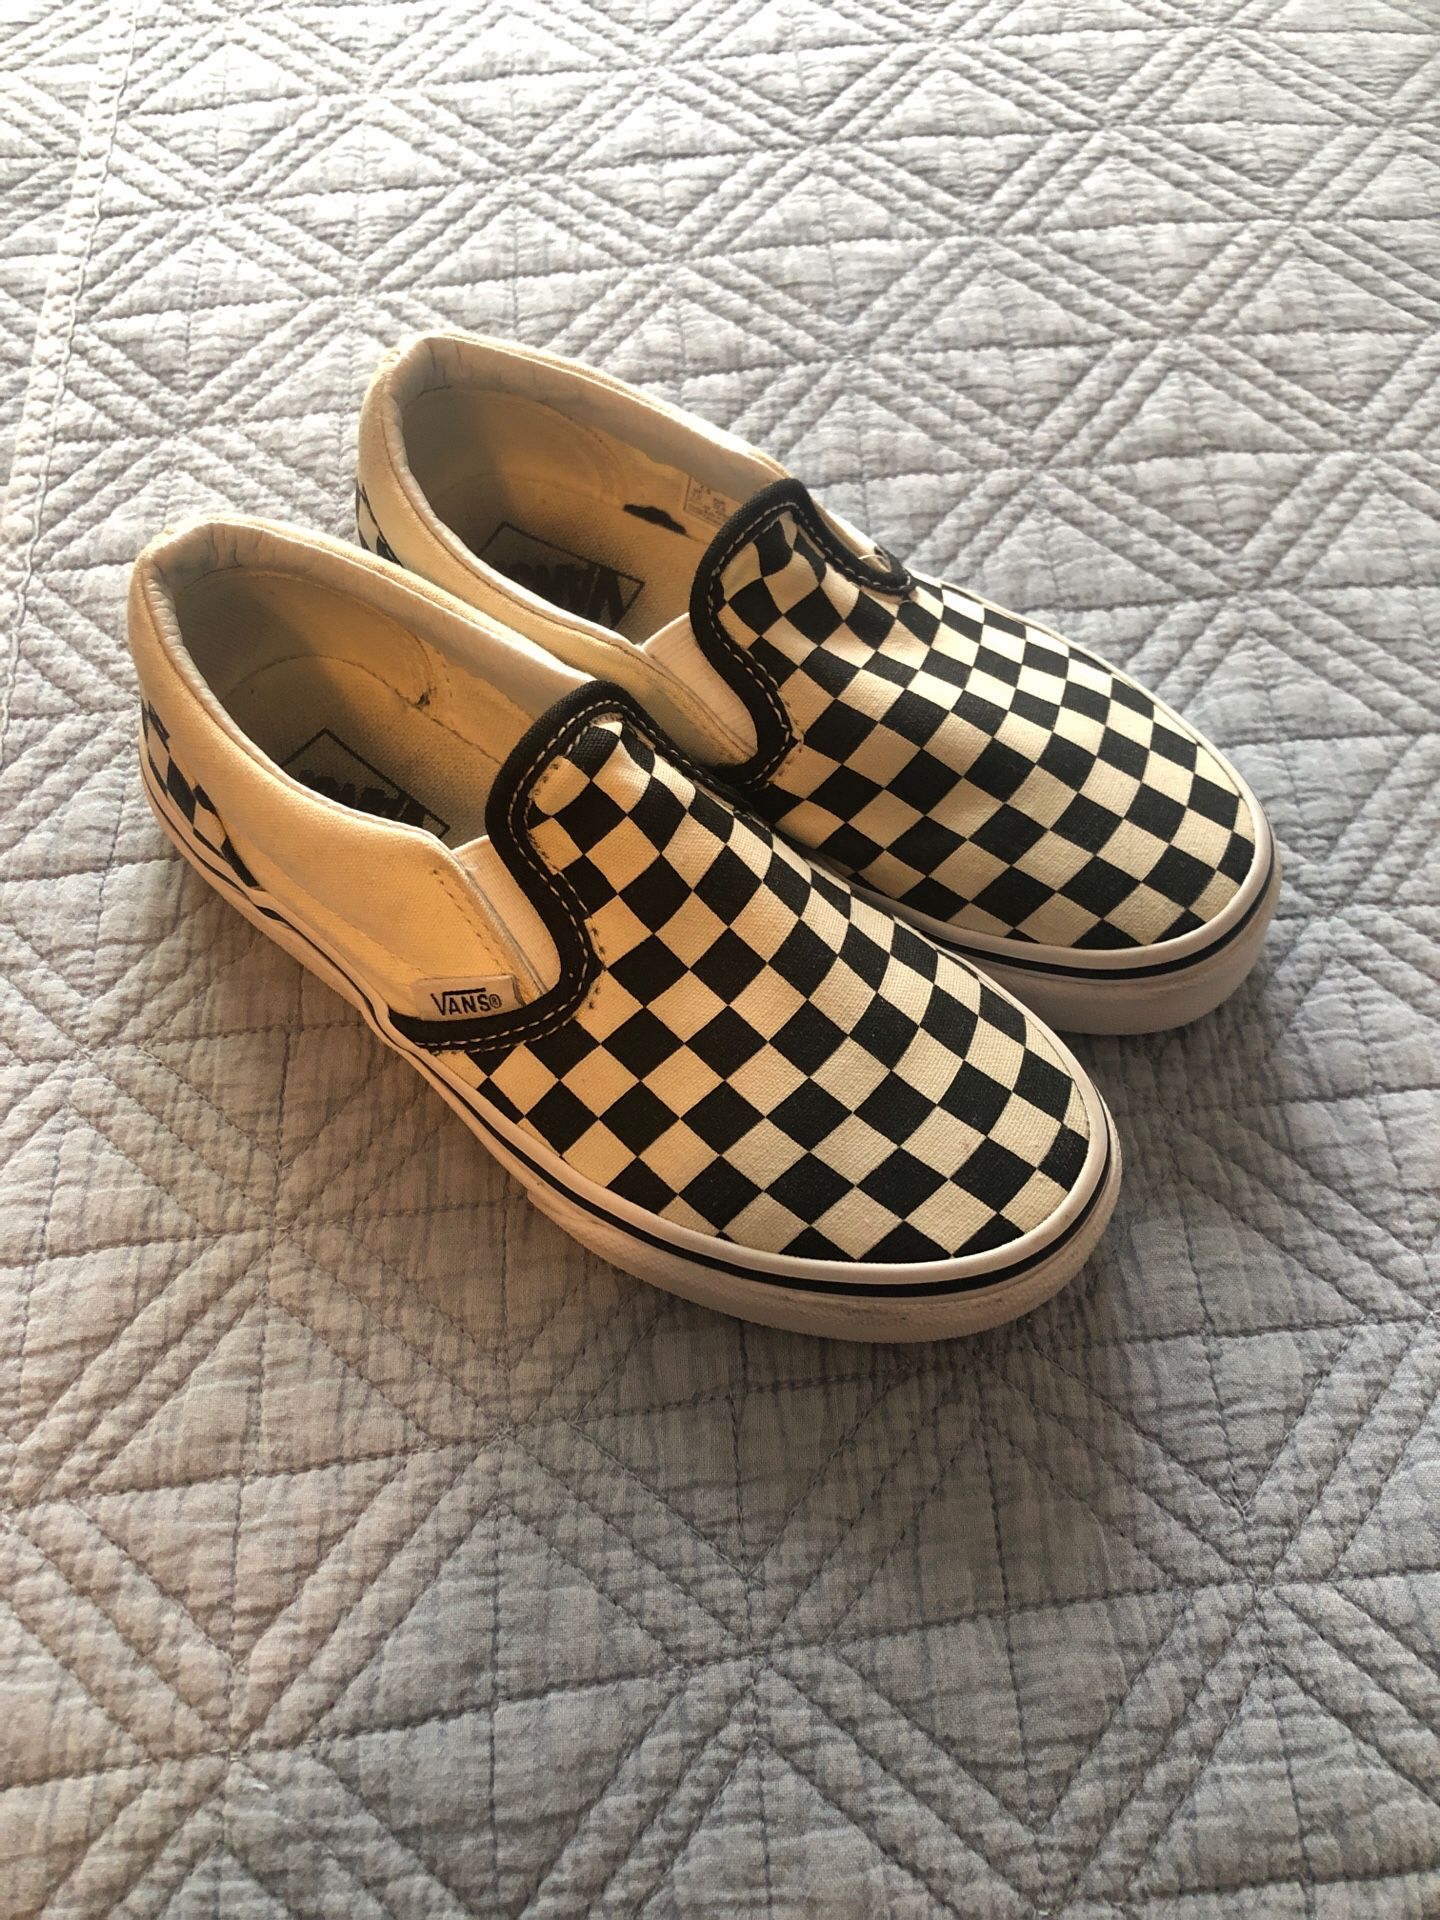 Vans size 1.5 my son only wore them twice. They’re in great condition.